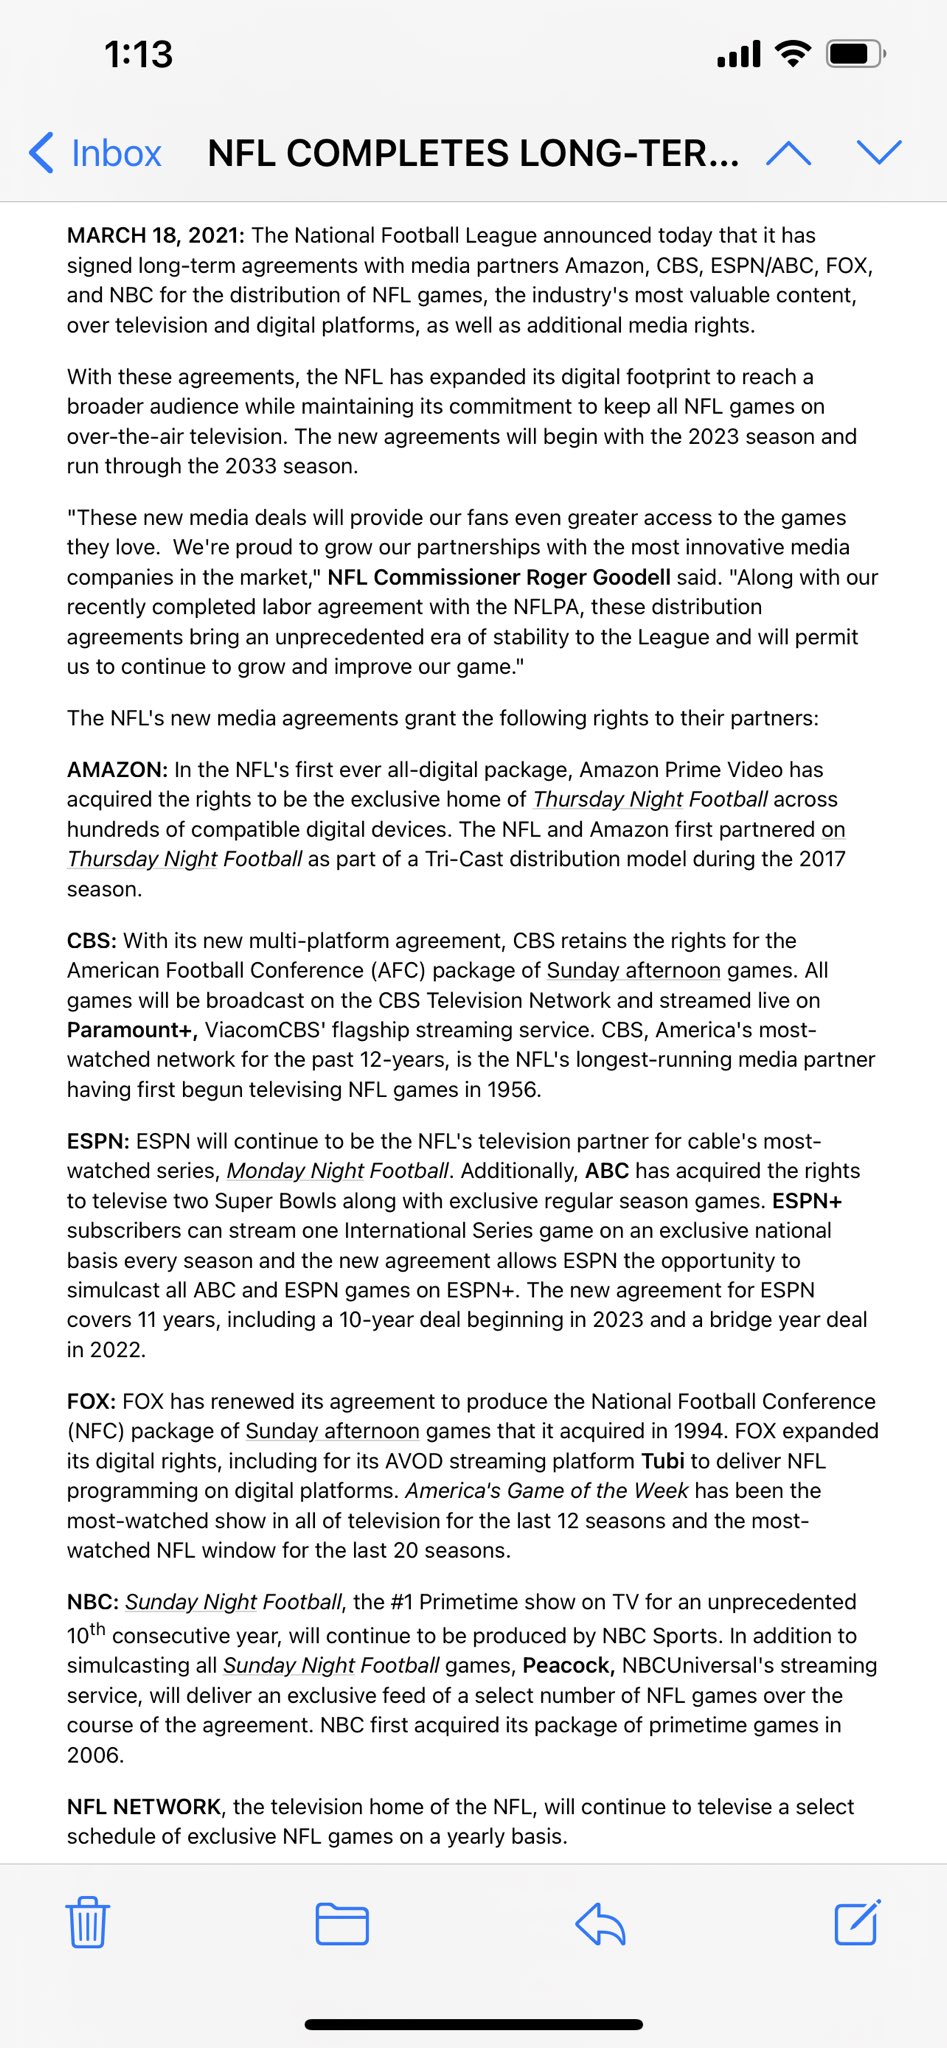 mushroom Counsel lettuce Jay Posner on Twitter: "New NFL TV deal runs from 2023-33. Biggest change  is Thursday games will be exclusive to Amazon Prime. Also, ABC gets two  Super Bowl and flex scheduling includes